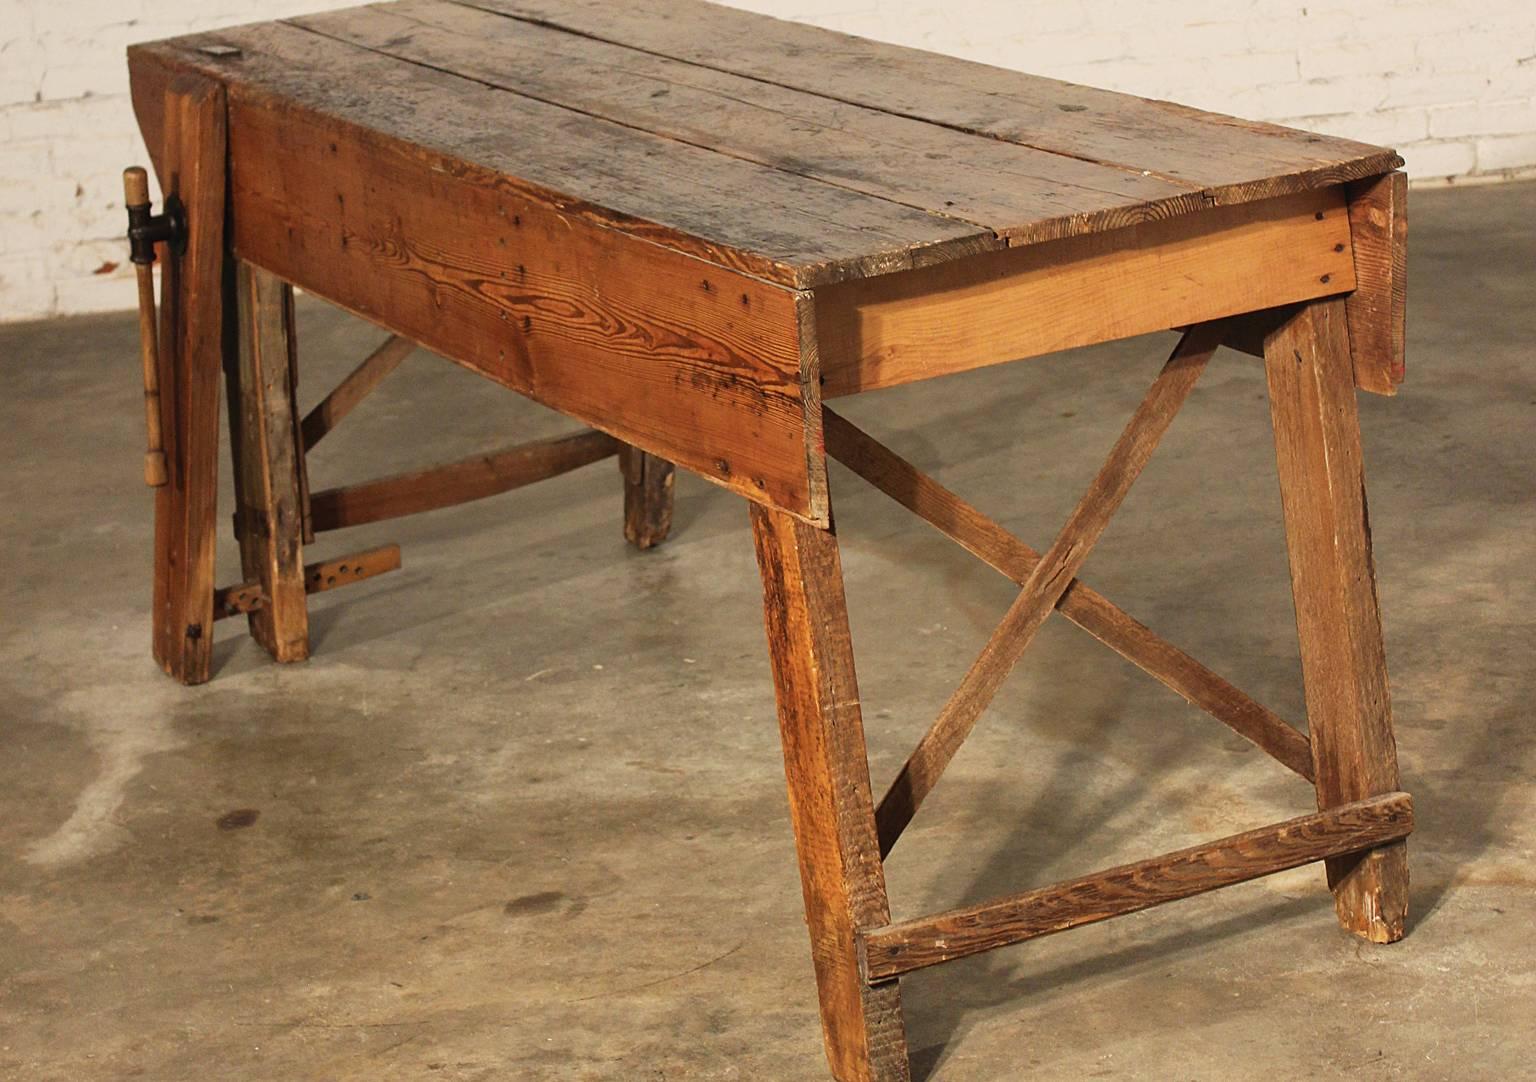 Just look at the gorgeous age patina on this fabulous primitive industrial farmhouse style pine dining table workbench. It even has its own integral wood vise attached to one of the legs. This piece makes an awesome dining table ( of course with the